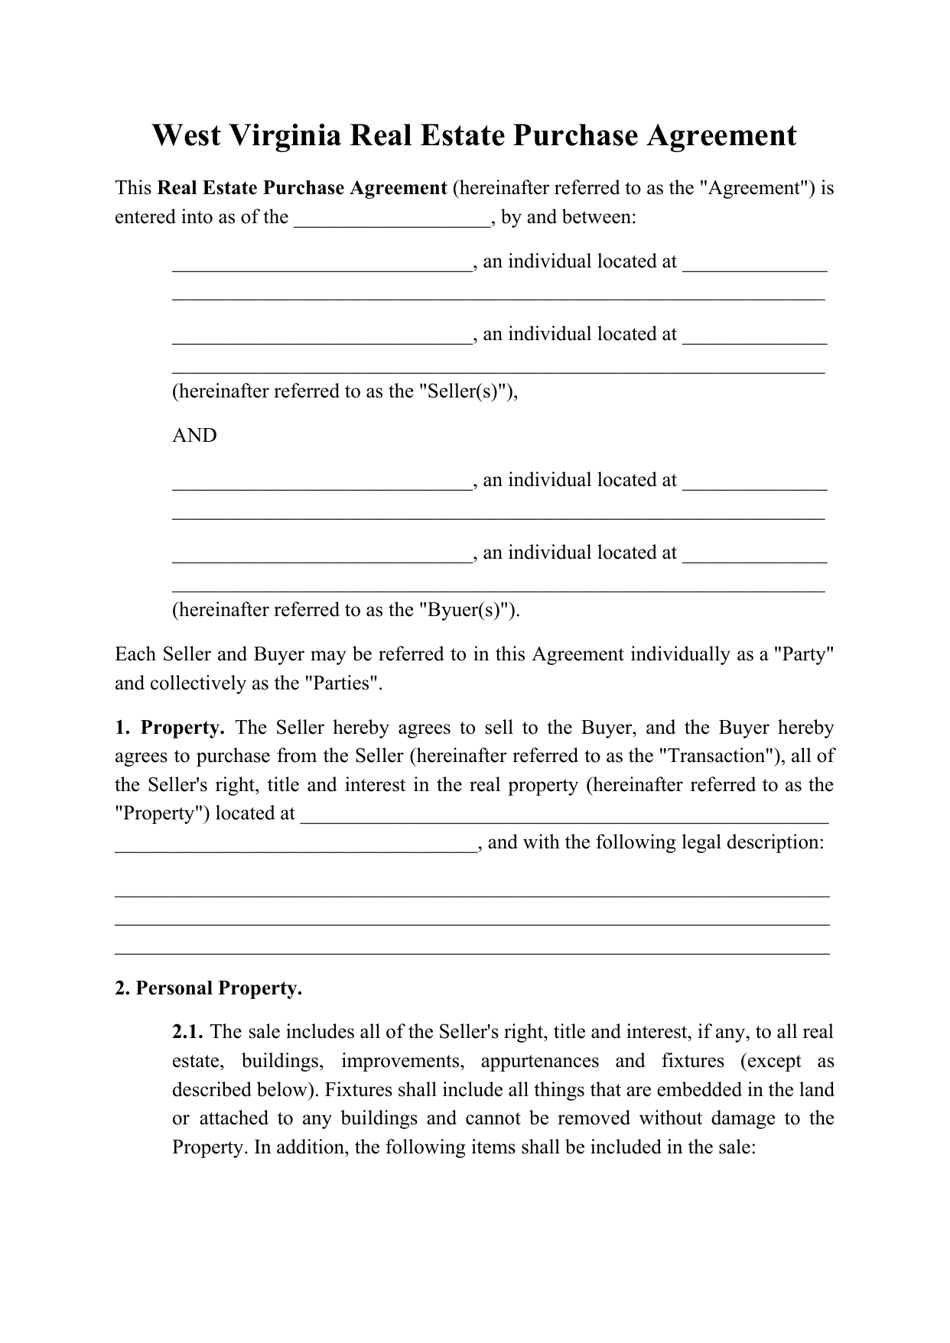 west-virginia-real-estate-purchase-agreement-template-fill-out-sign